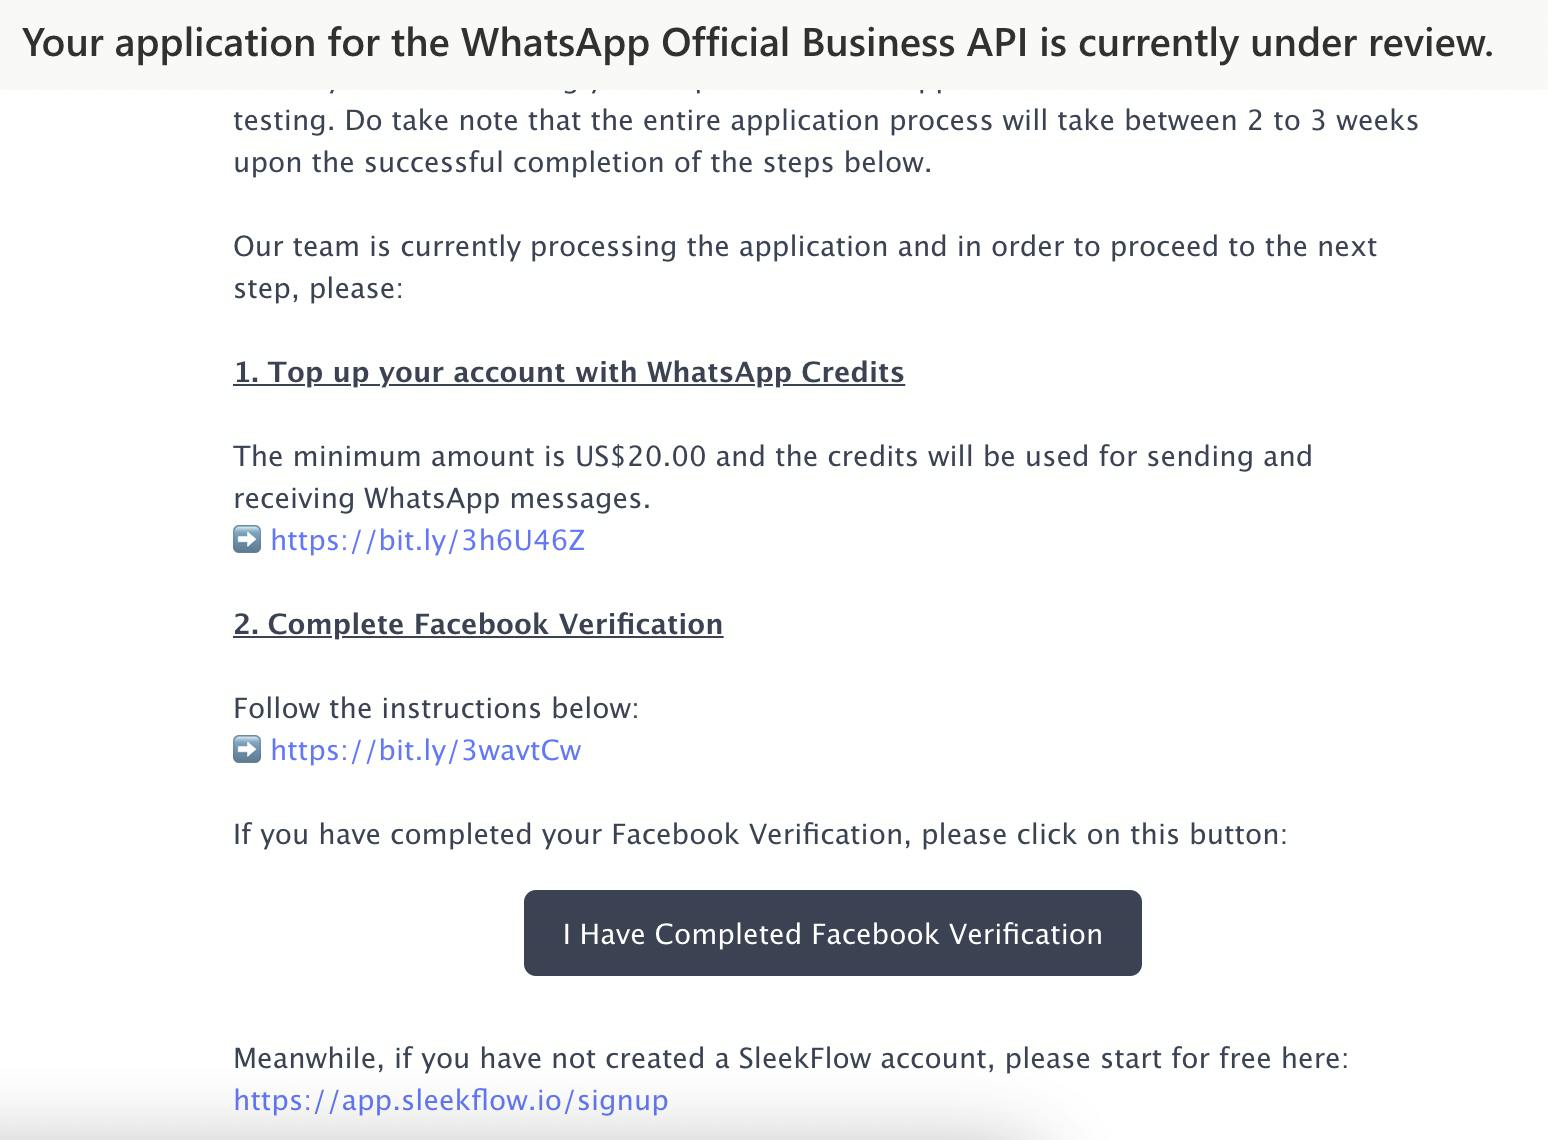 Application for WhatsApp Official Business API under review